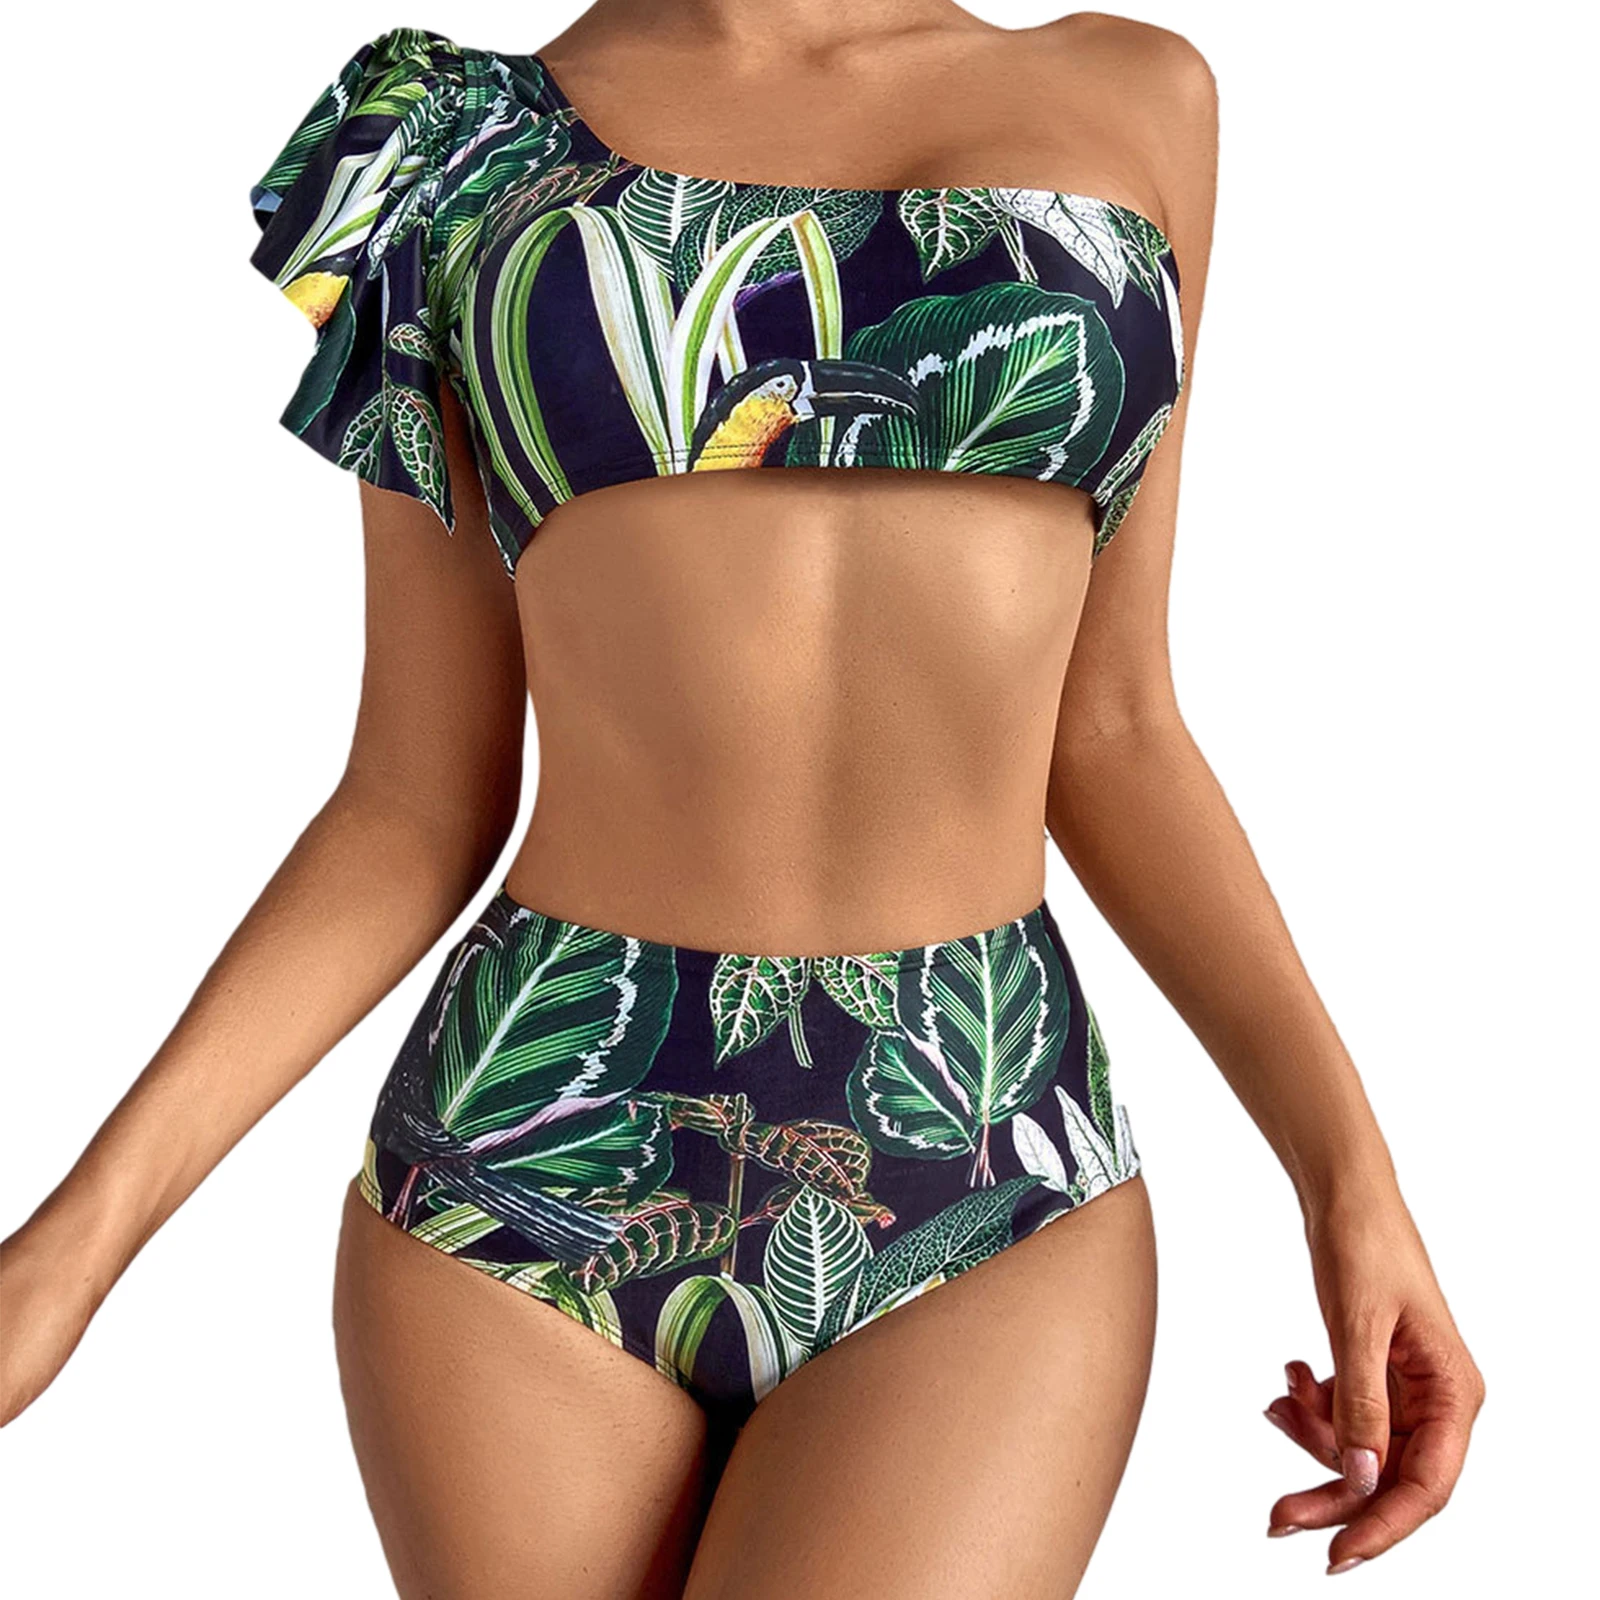 

Summer Ladiess Vacation Style Printed Bikini Suit, Ruffled Single Shoulder Bustier Tops with High Waist Triangle Bottoms